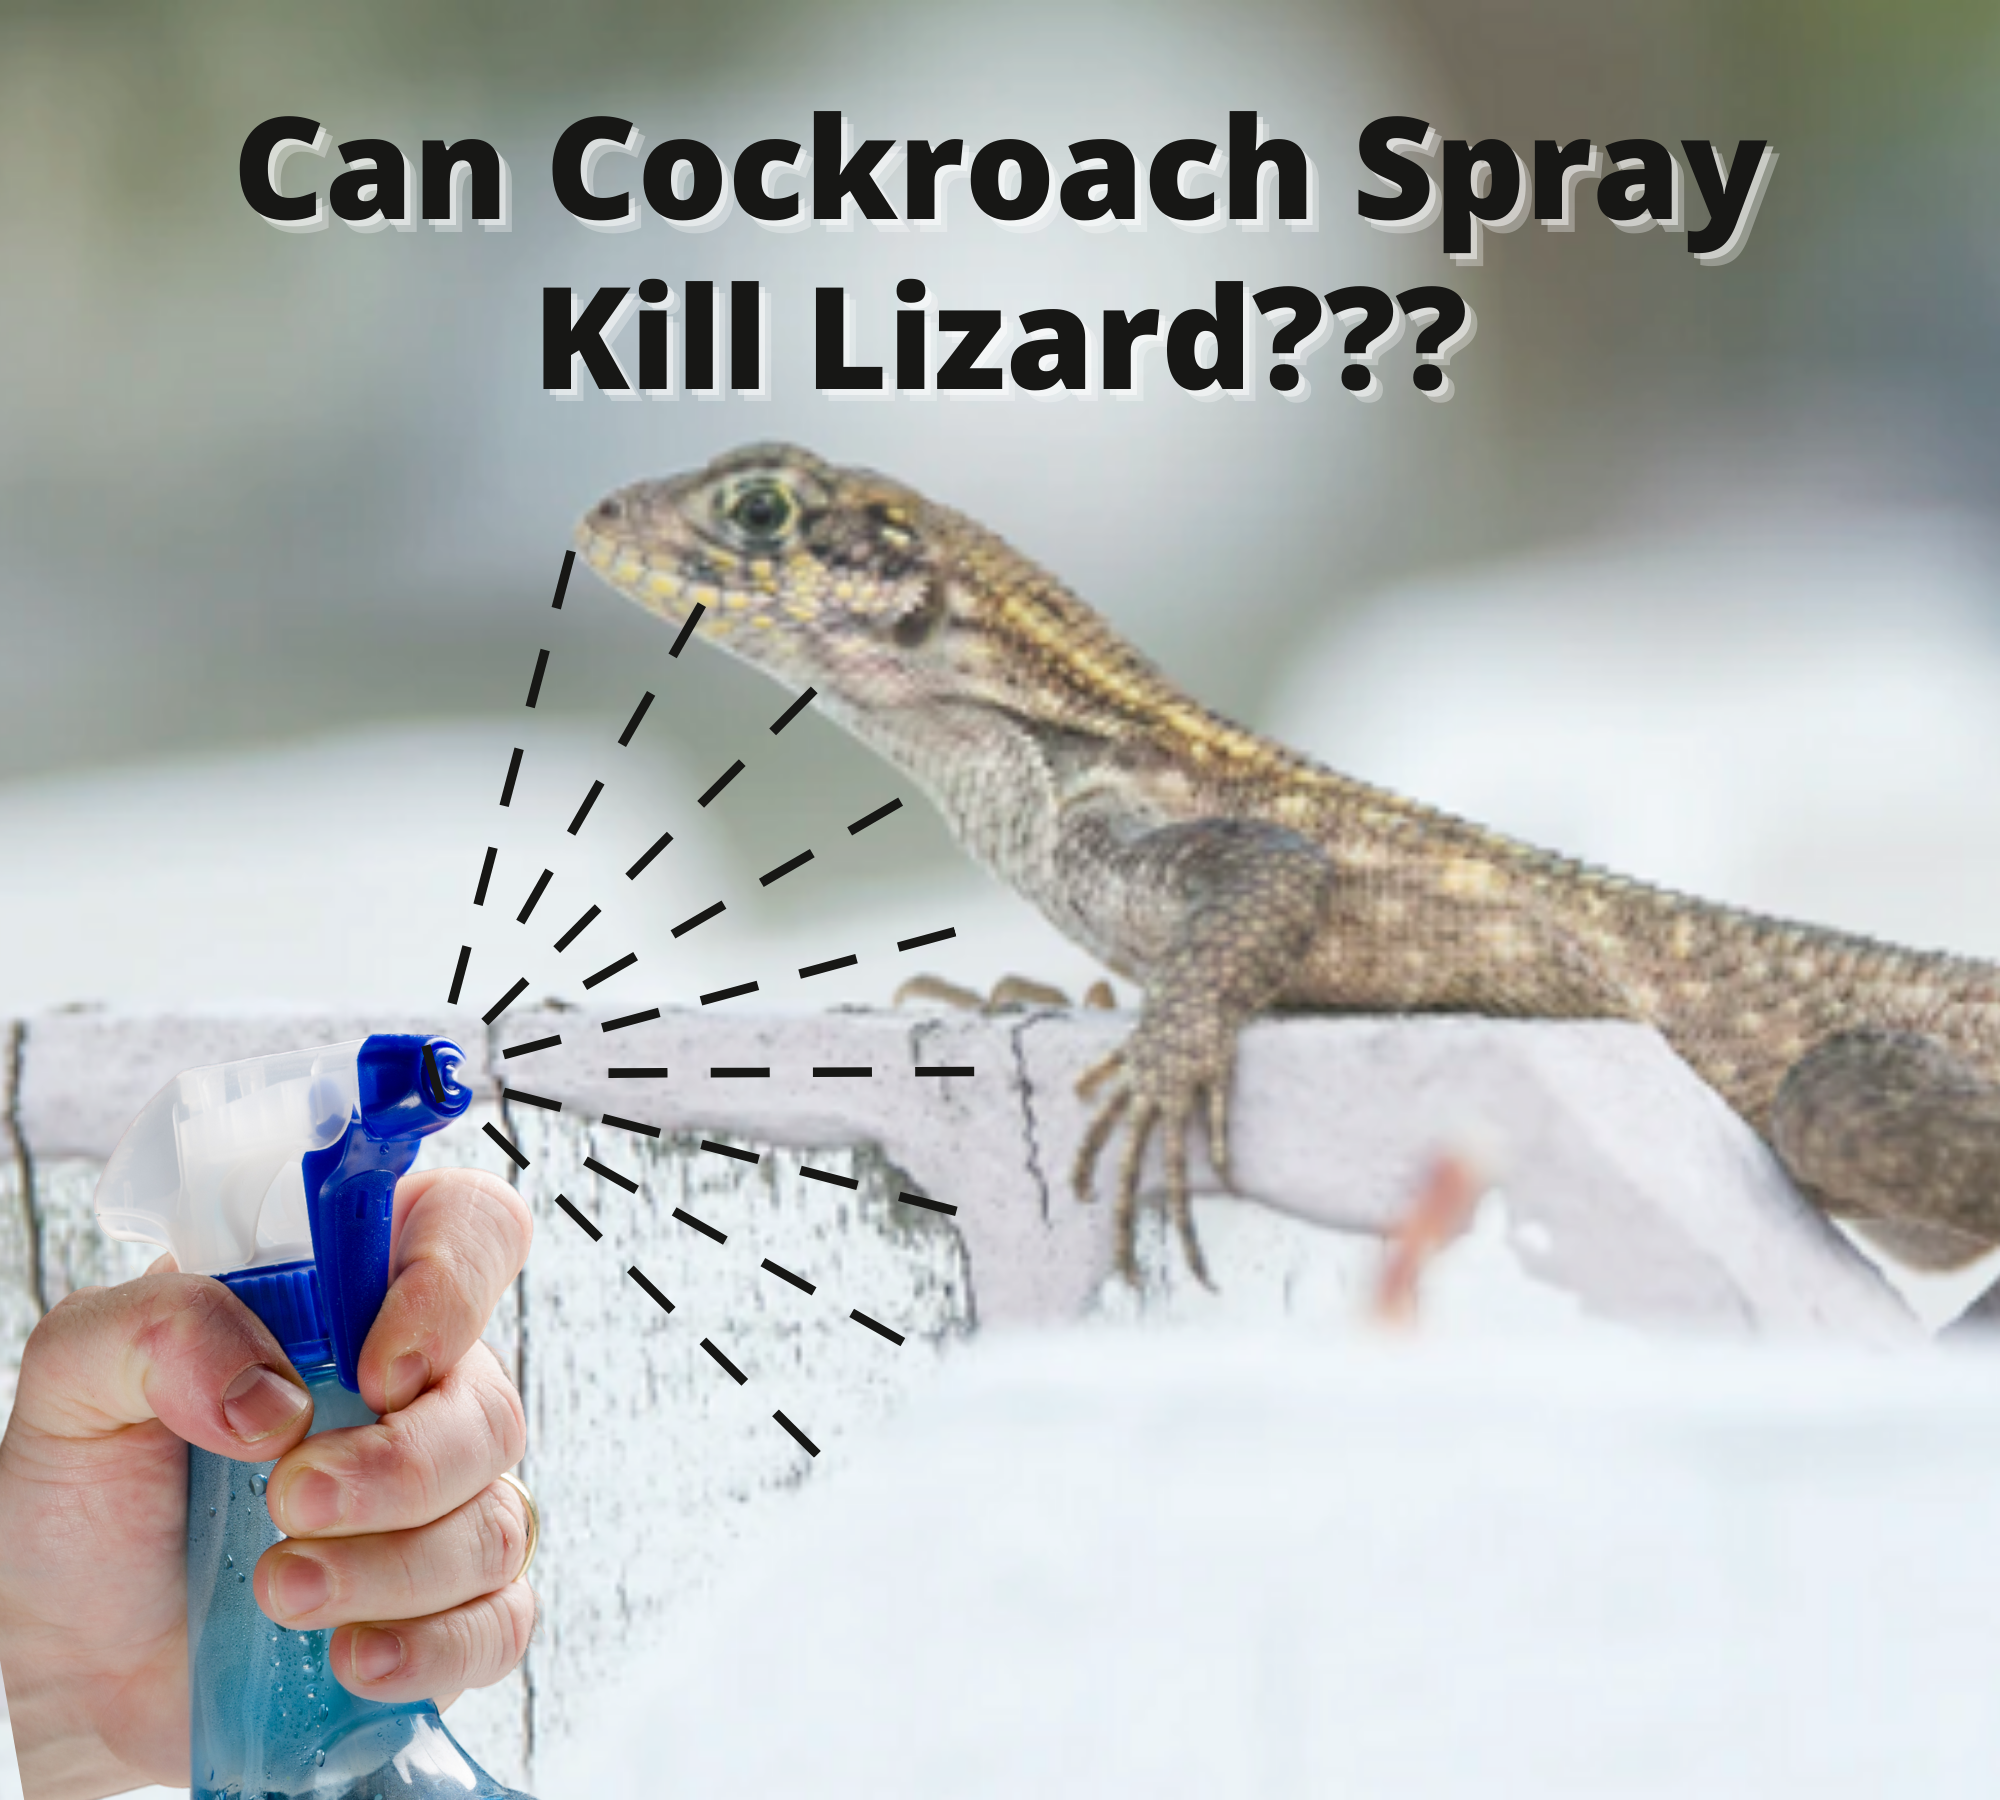 Are cockroaches killer enough to kill lizards?